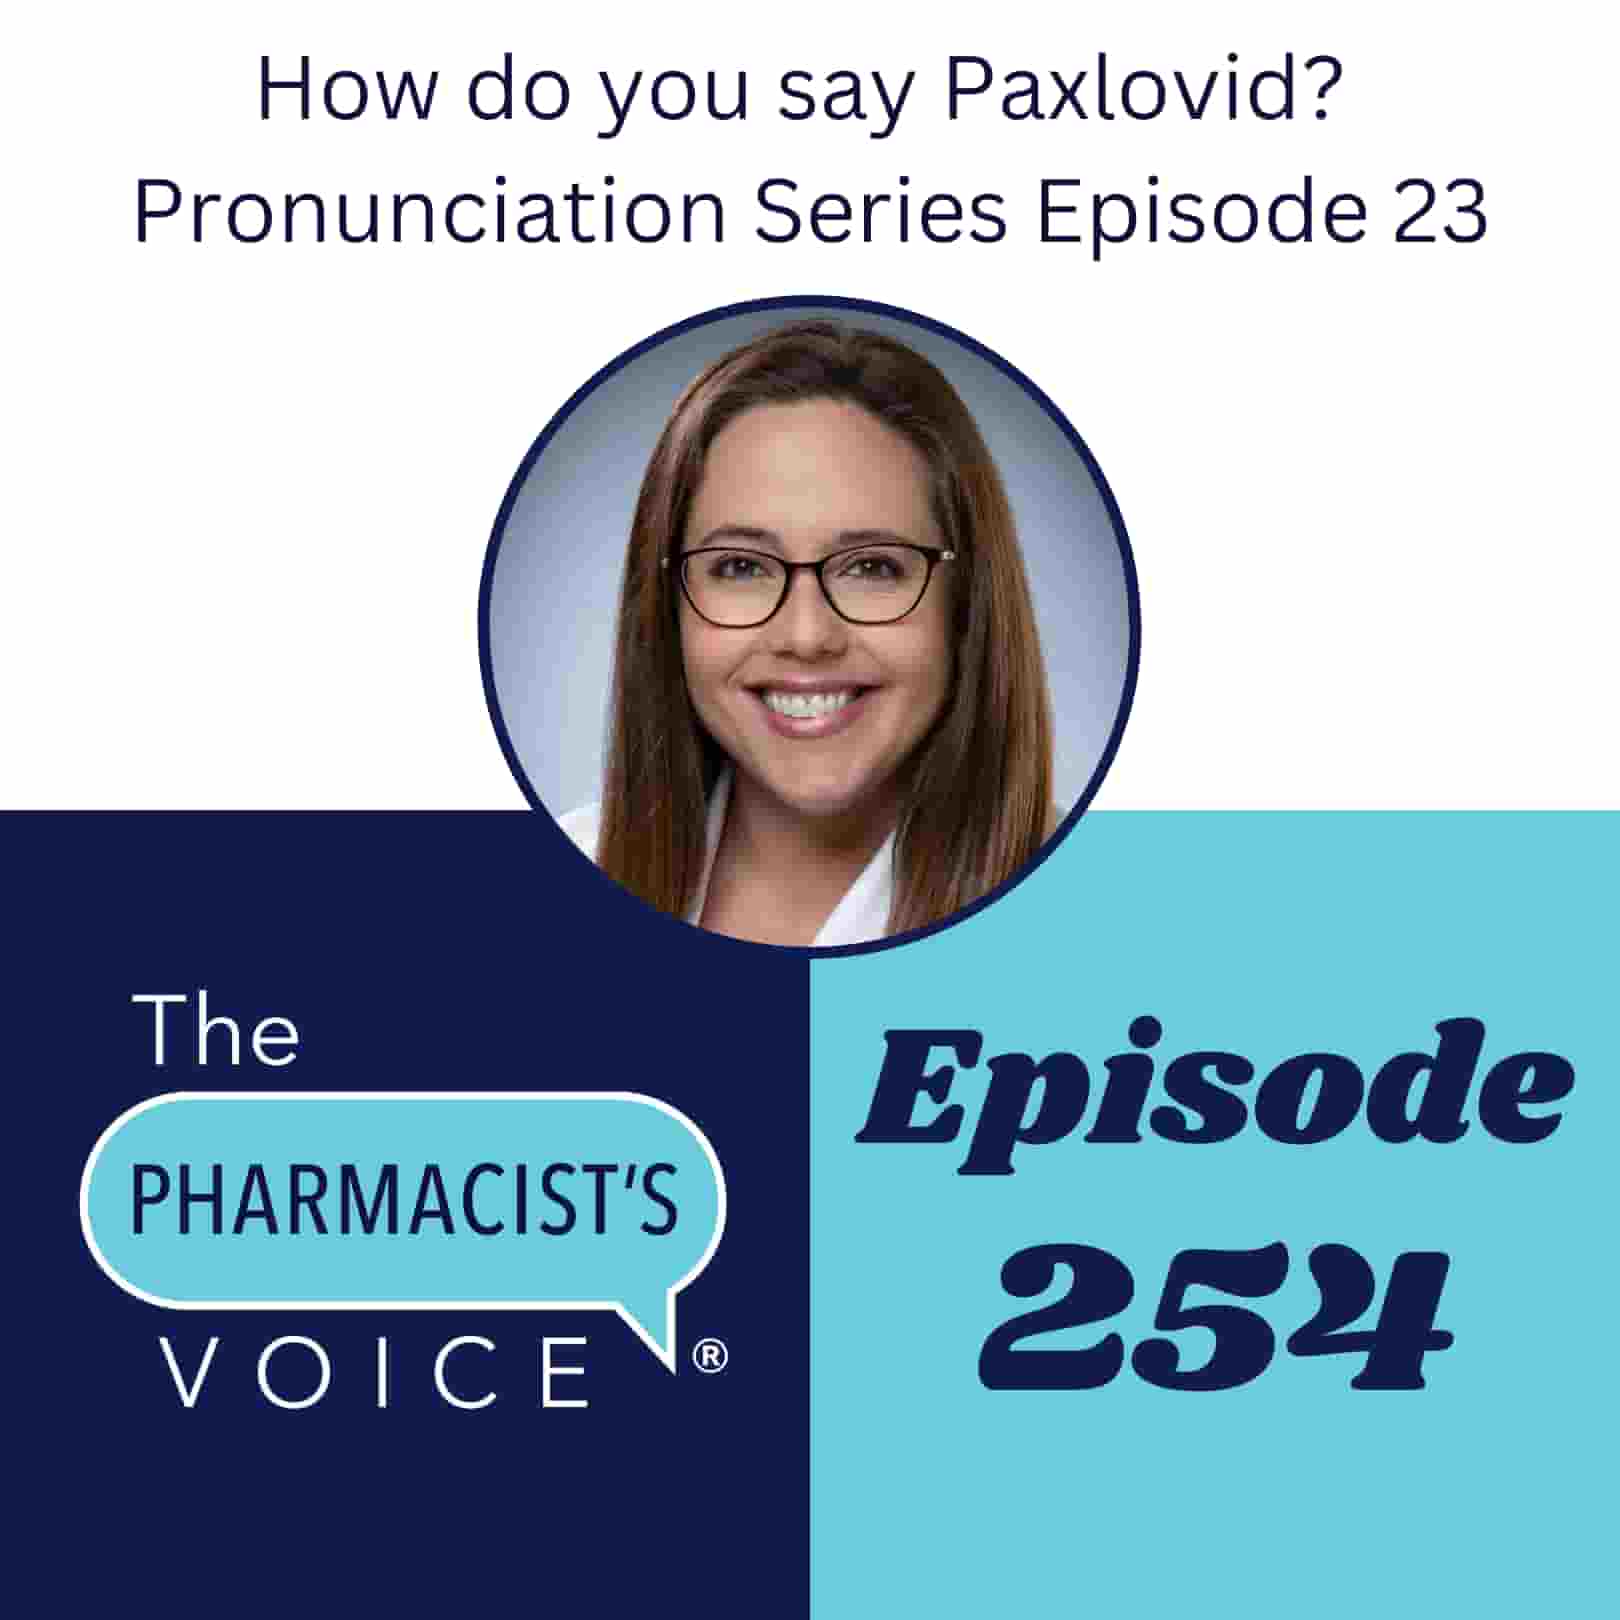 The Pharmacist's Voice Podcast Episode 254. How do you say Paxlovid? Pronunciation Series Episode 23